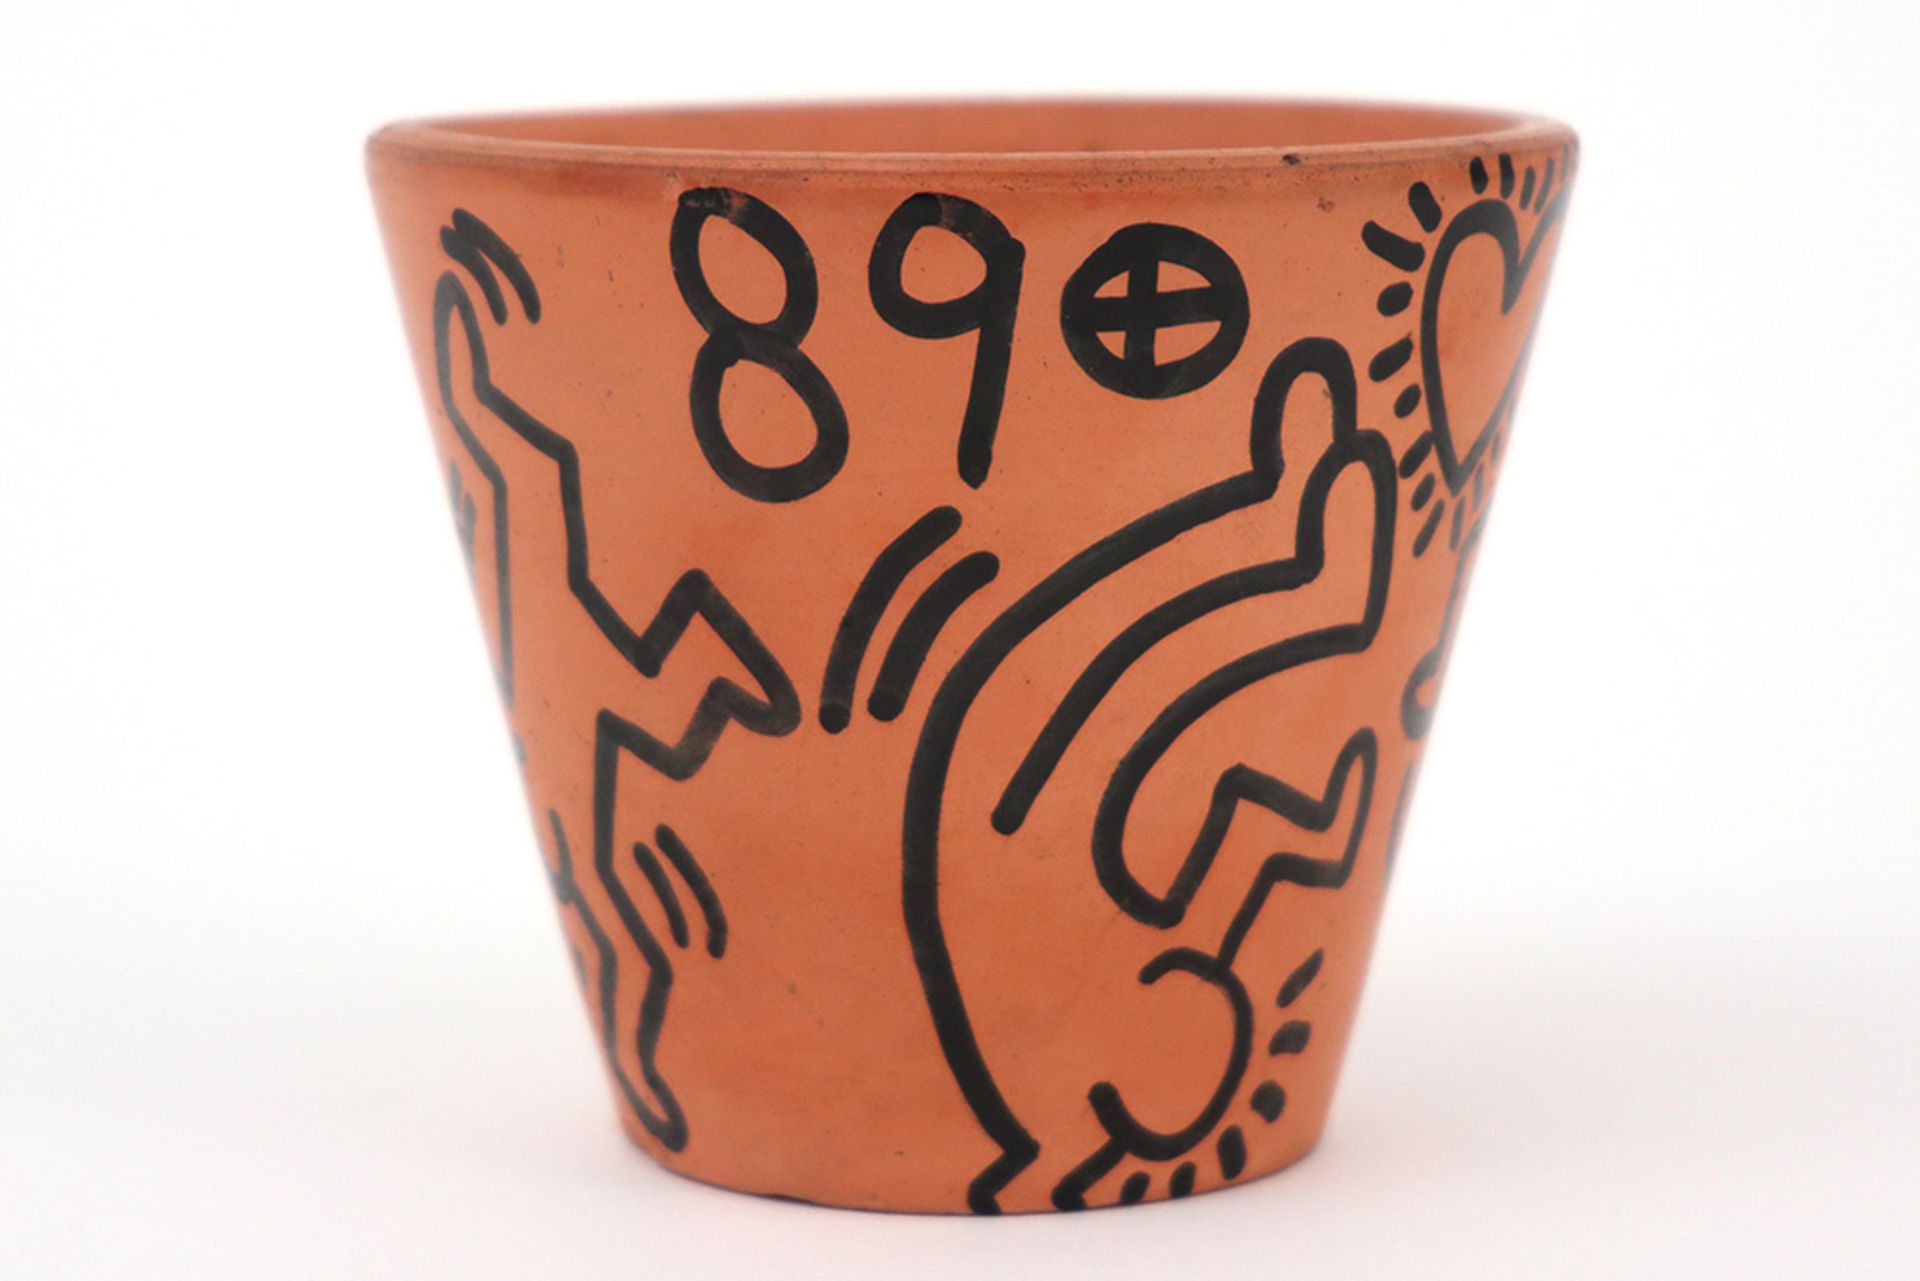 Keith Haring signed drawing in felt-tip pen on ceramic flower pot - dated (19)89 || HARING KEITH ( - Image 6 of 7